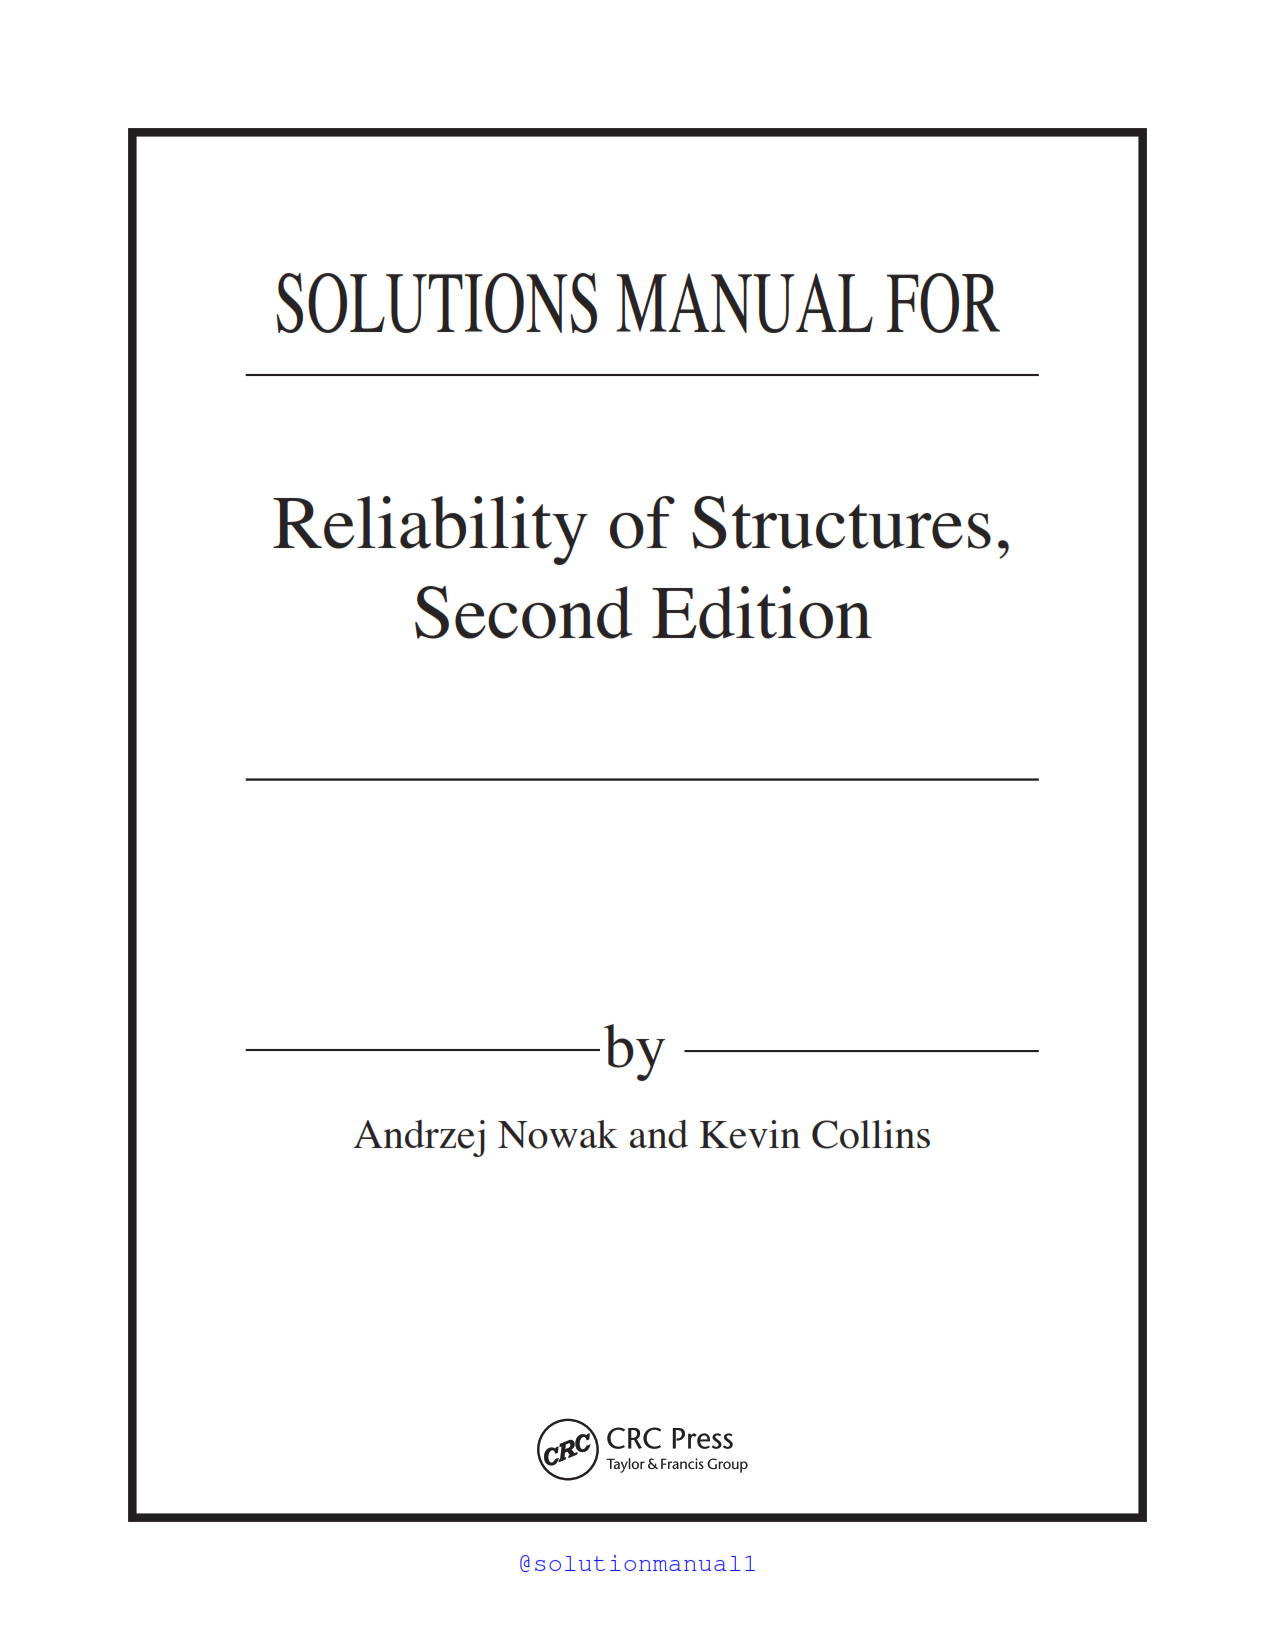 Download free Reliability of Structures 2nd Edition Andrzej S. Nowak & Kevin Collins Solutions Manual pdf | solution